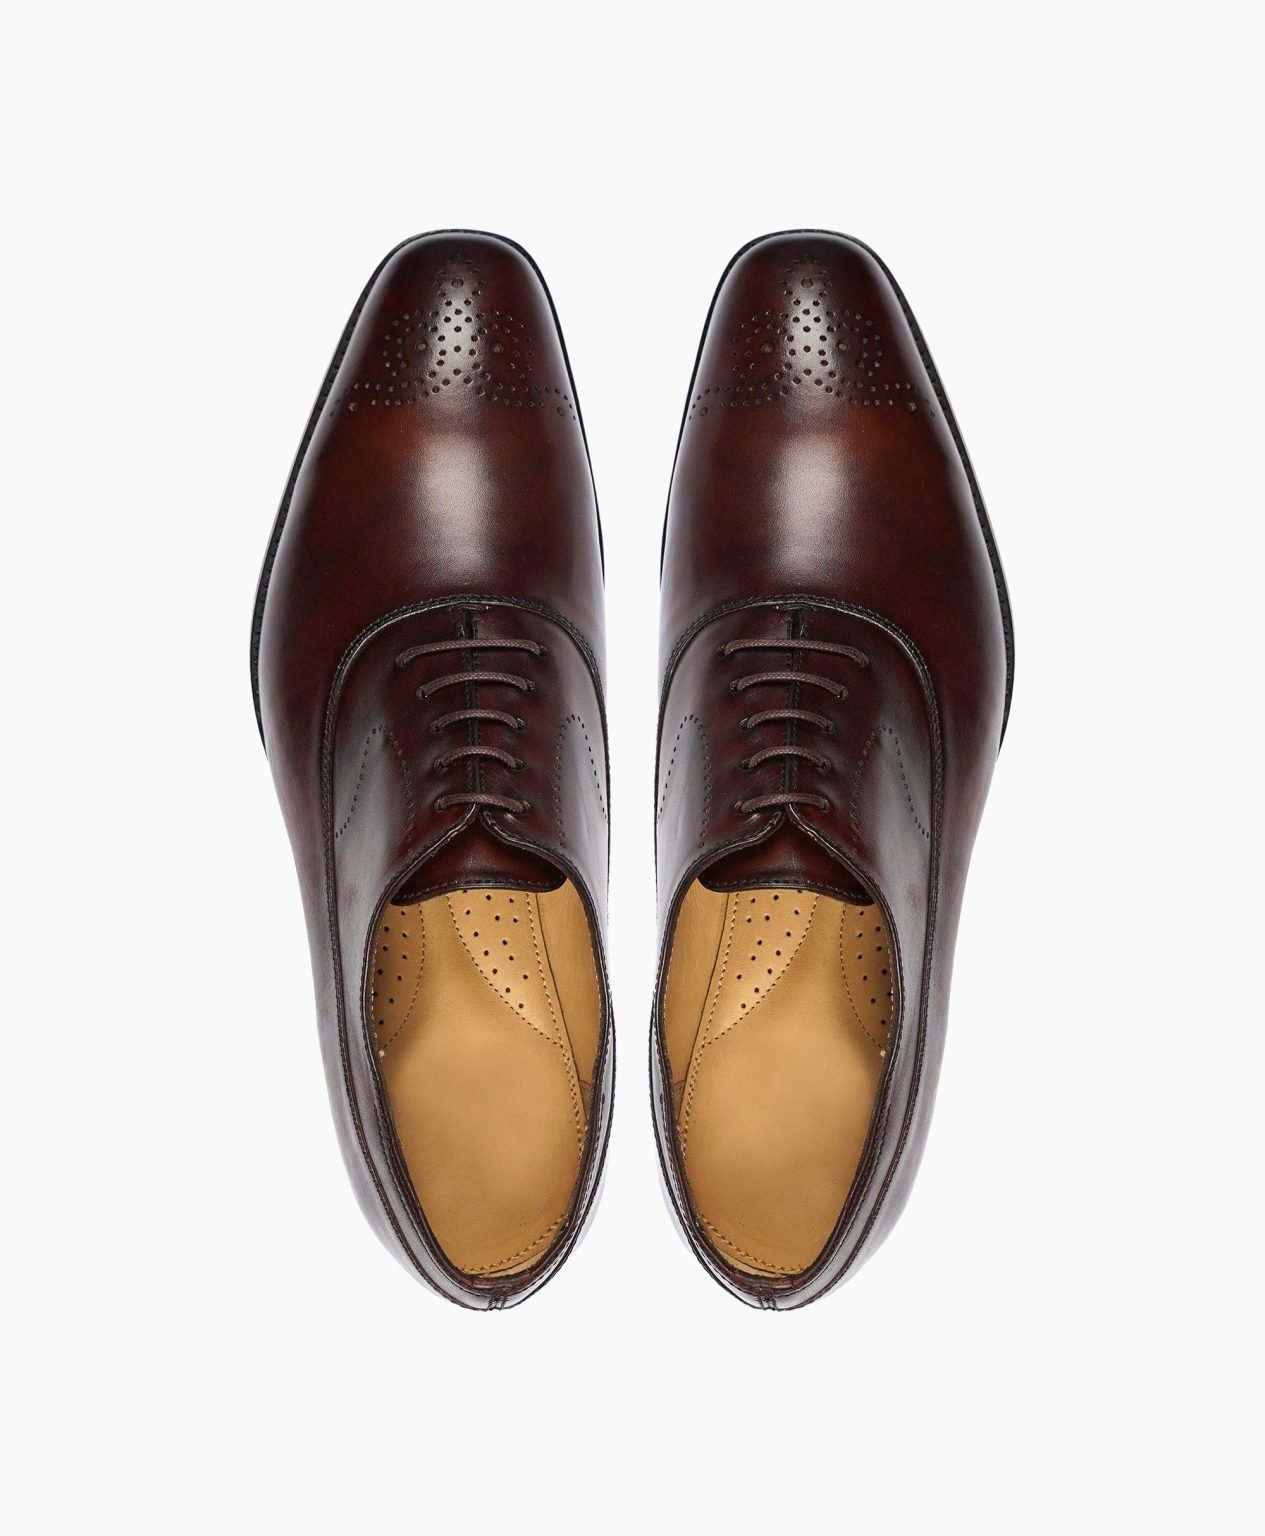 knutsford-oxford-dark-brown-leather-shoes-image202